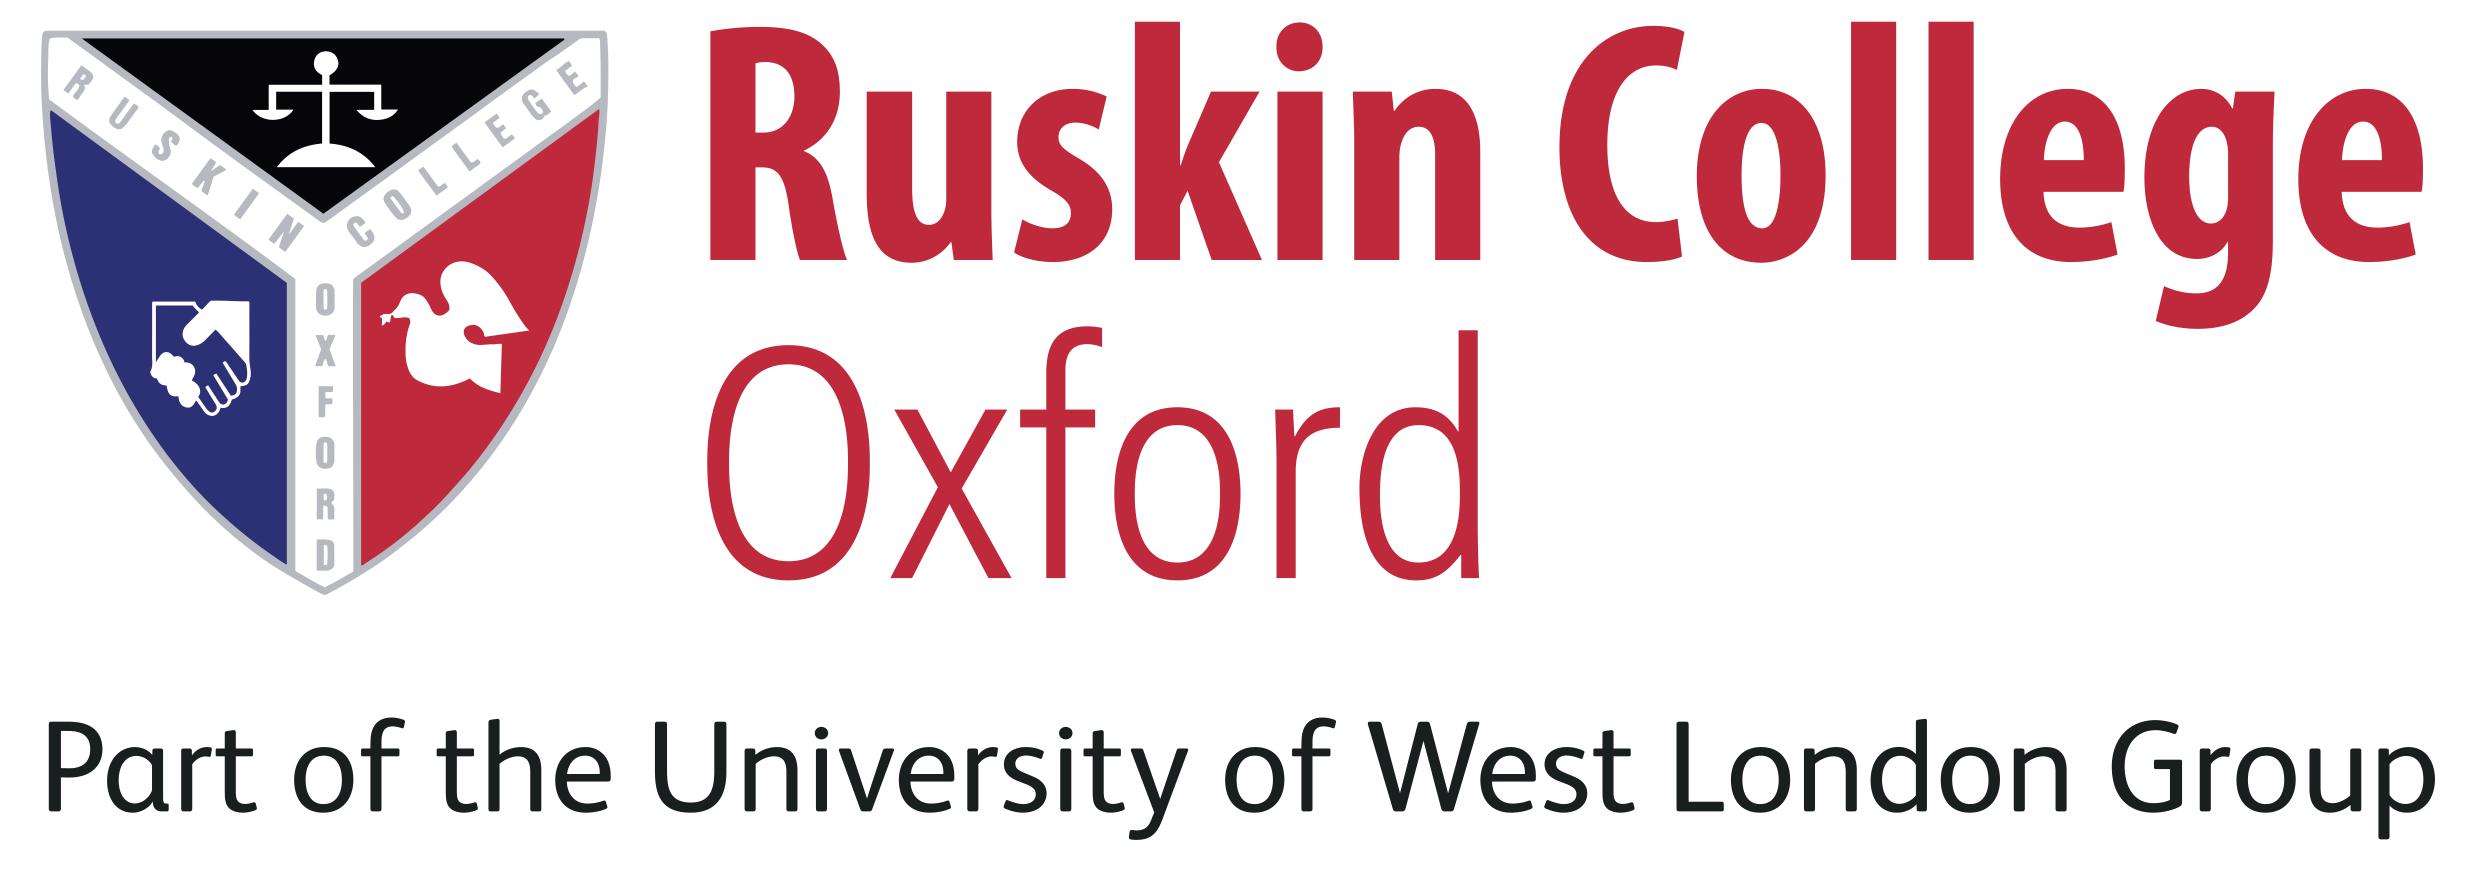 Ruskin College (Part of the University of West London)